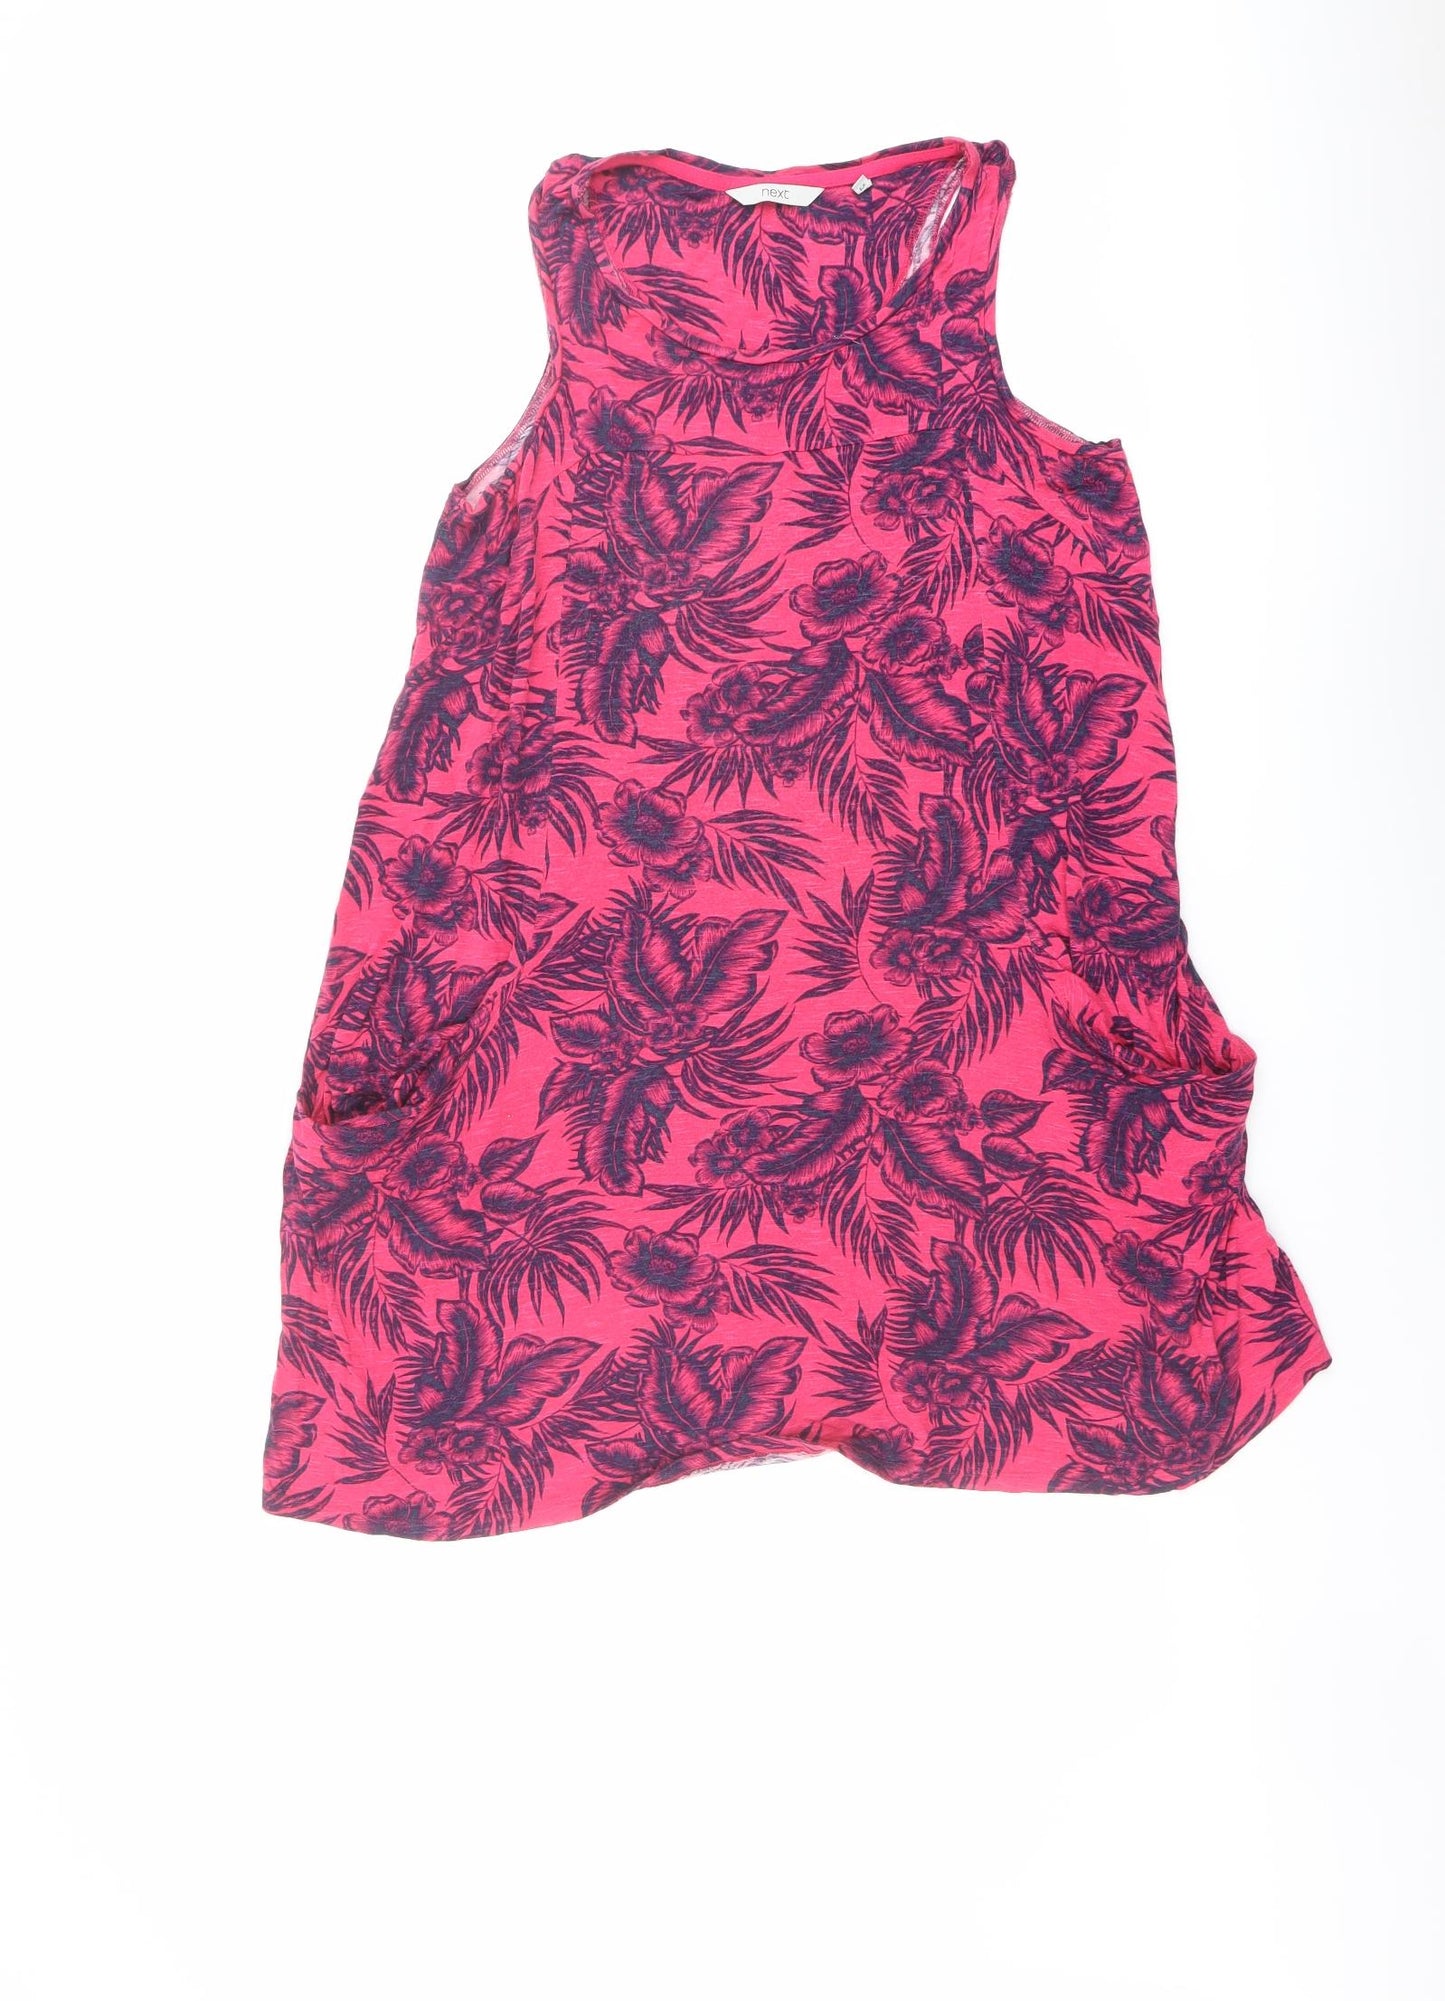 NEXT Womens Pink Geometric Viscose Tank Dress Size 14 Round Neck Pullover - Floral and Leaves